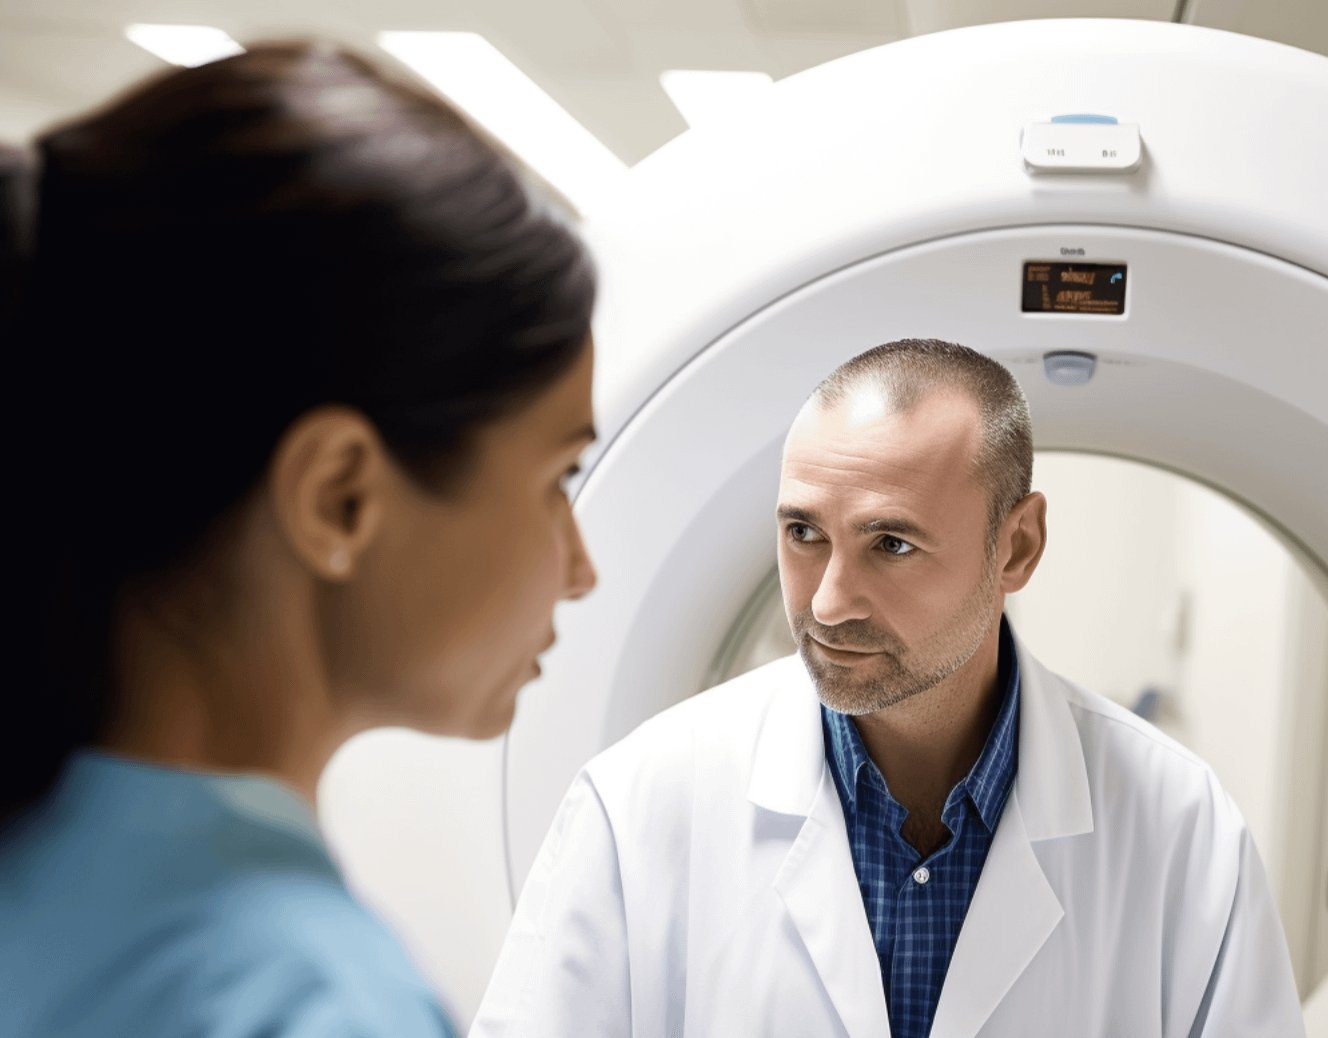 An MRI technician and a patient